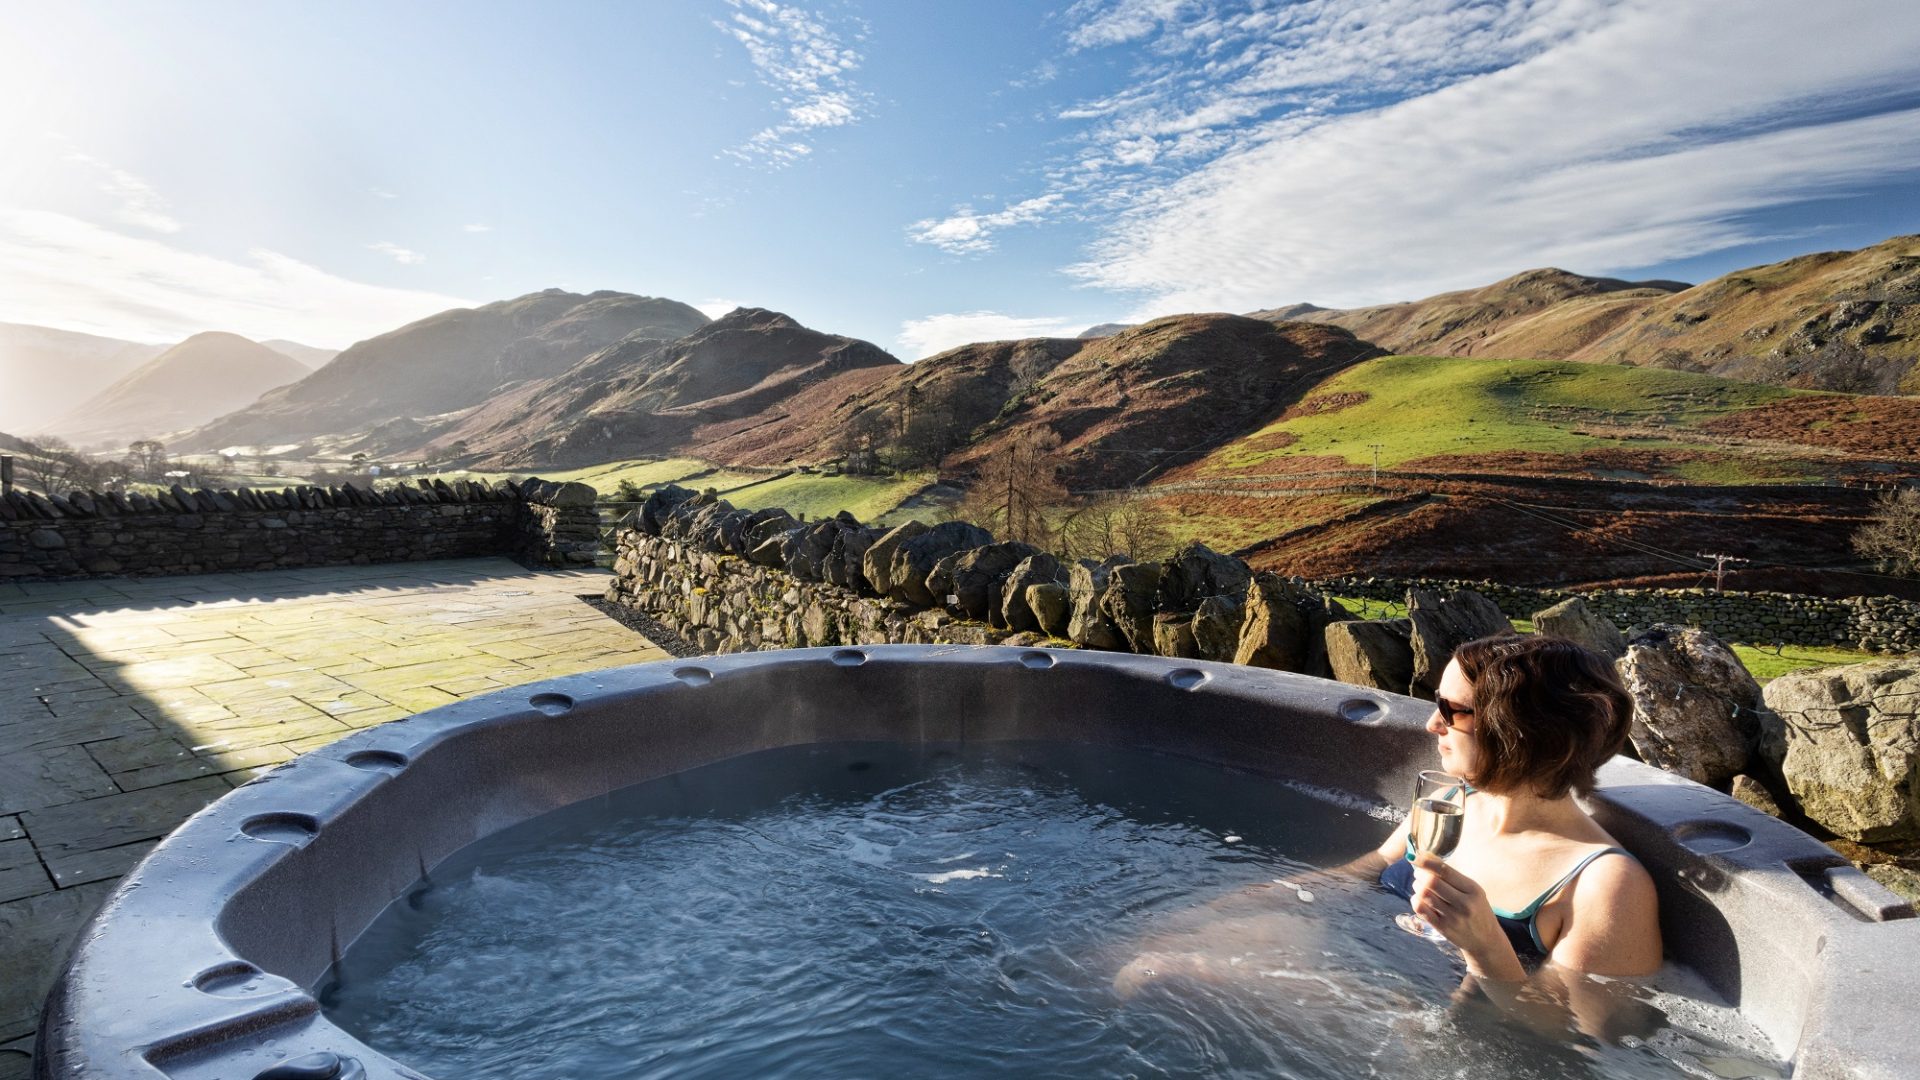 Hause-Hall-hot-tub-rental-view-over-fells-image-courtesy-of-Neil-Fraser